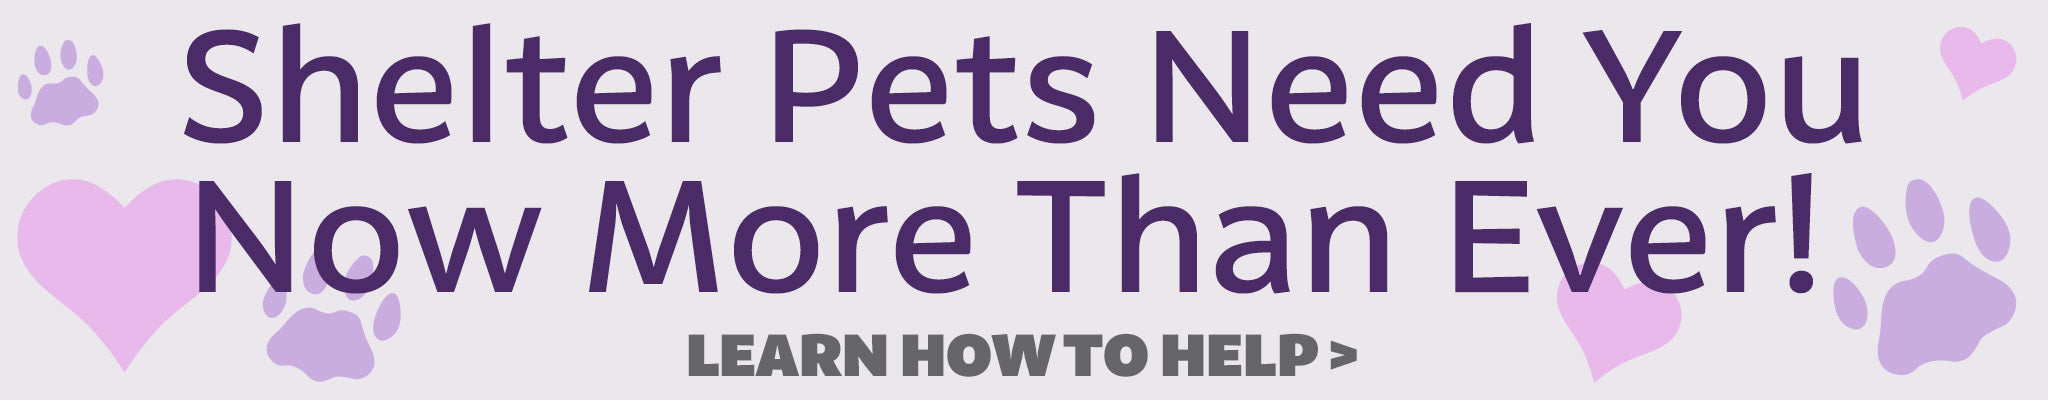 Shelter Pets Need You Now More Than Never | Learn How To Help